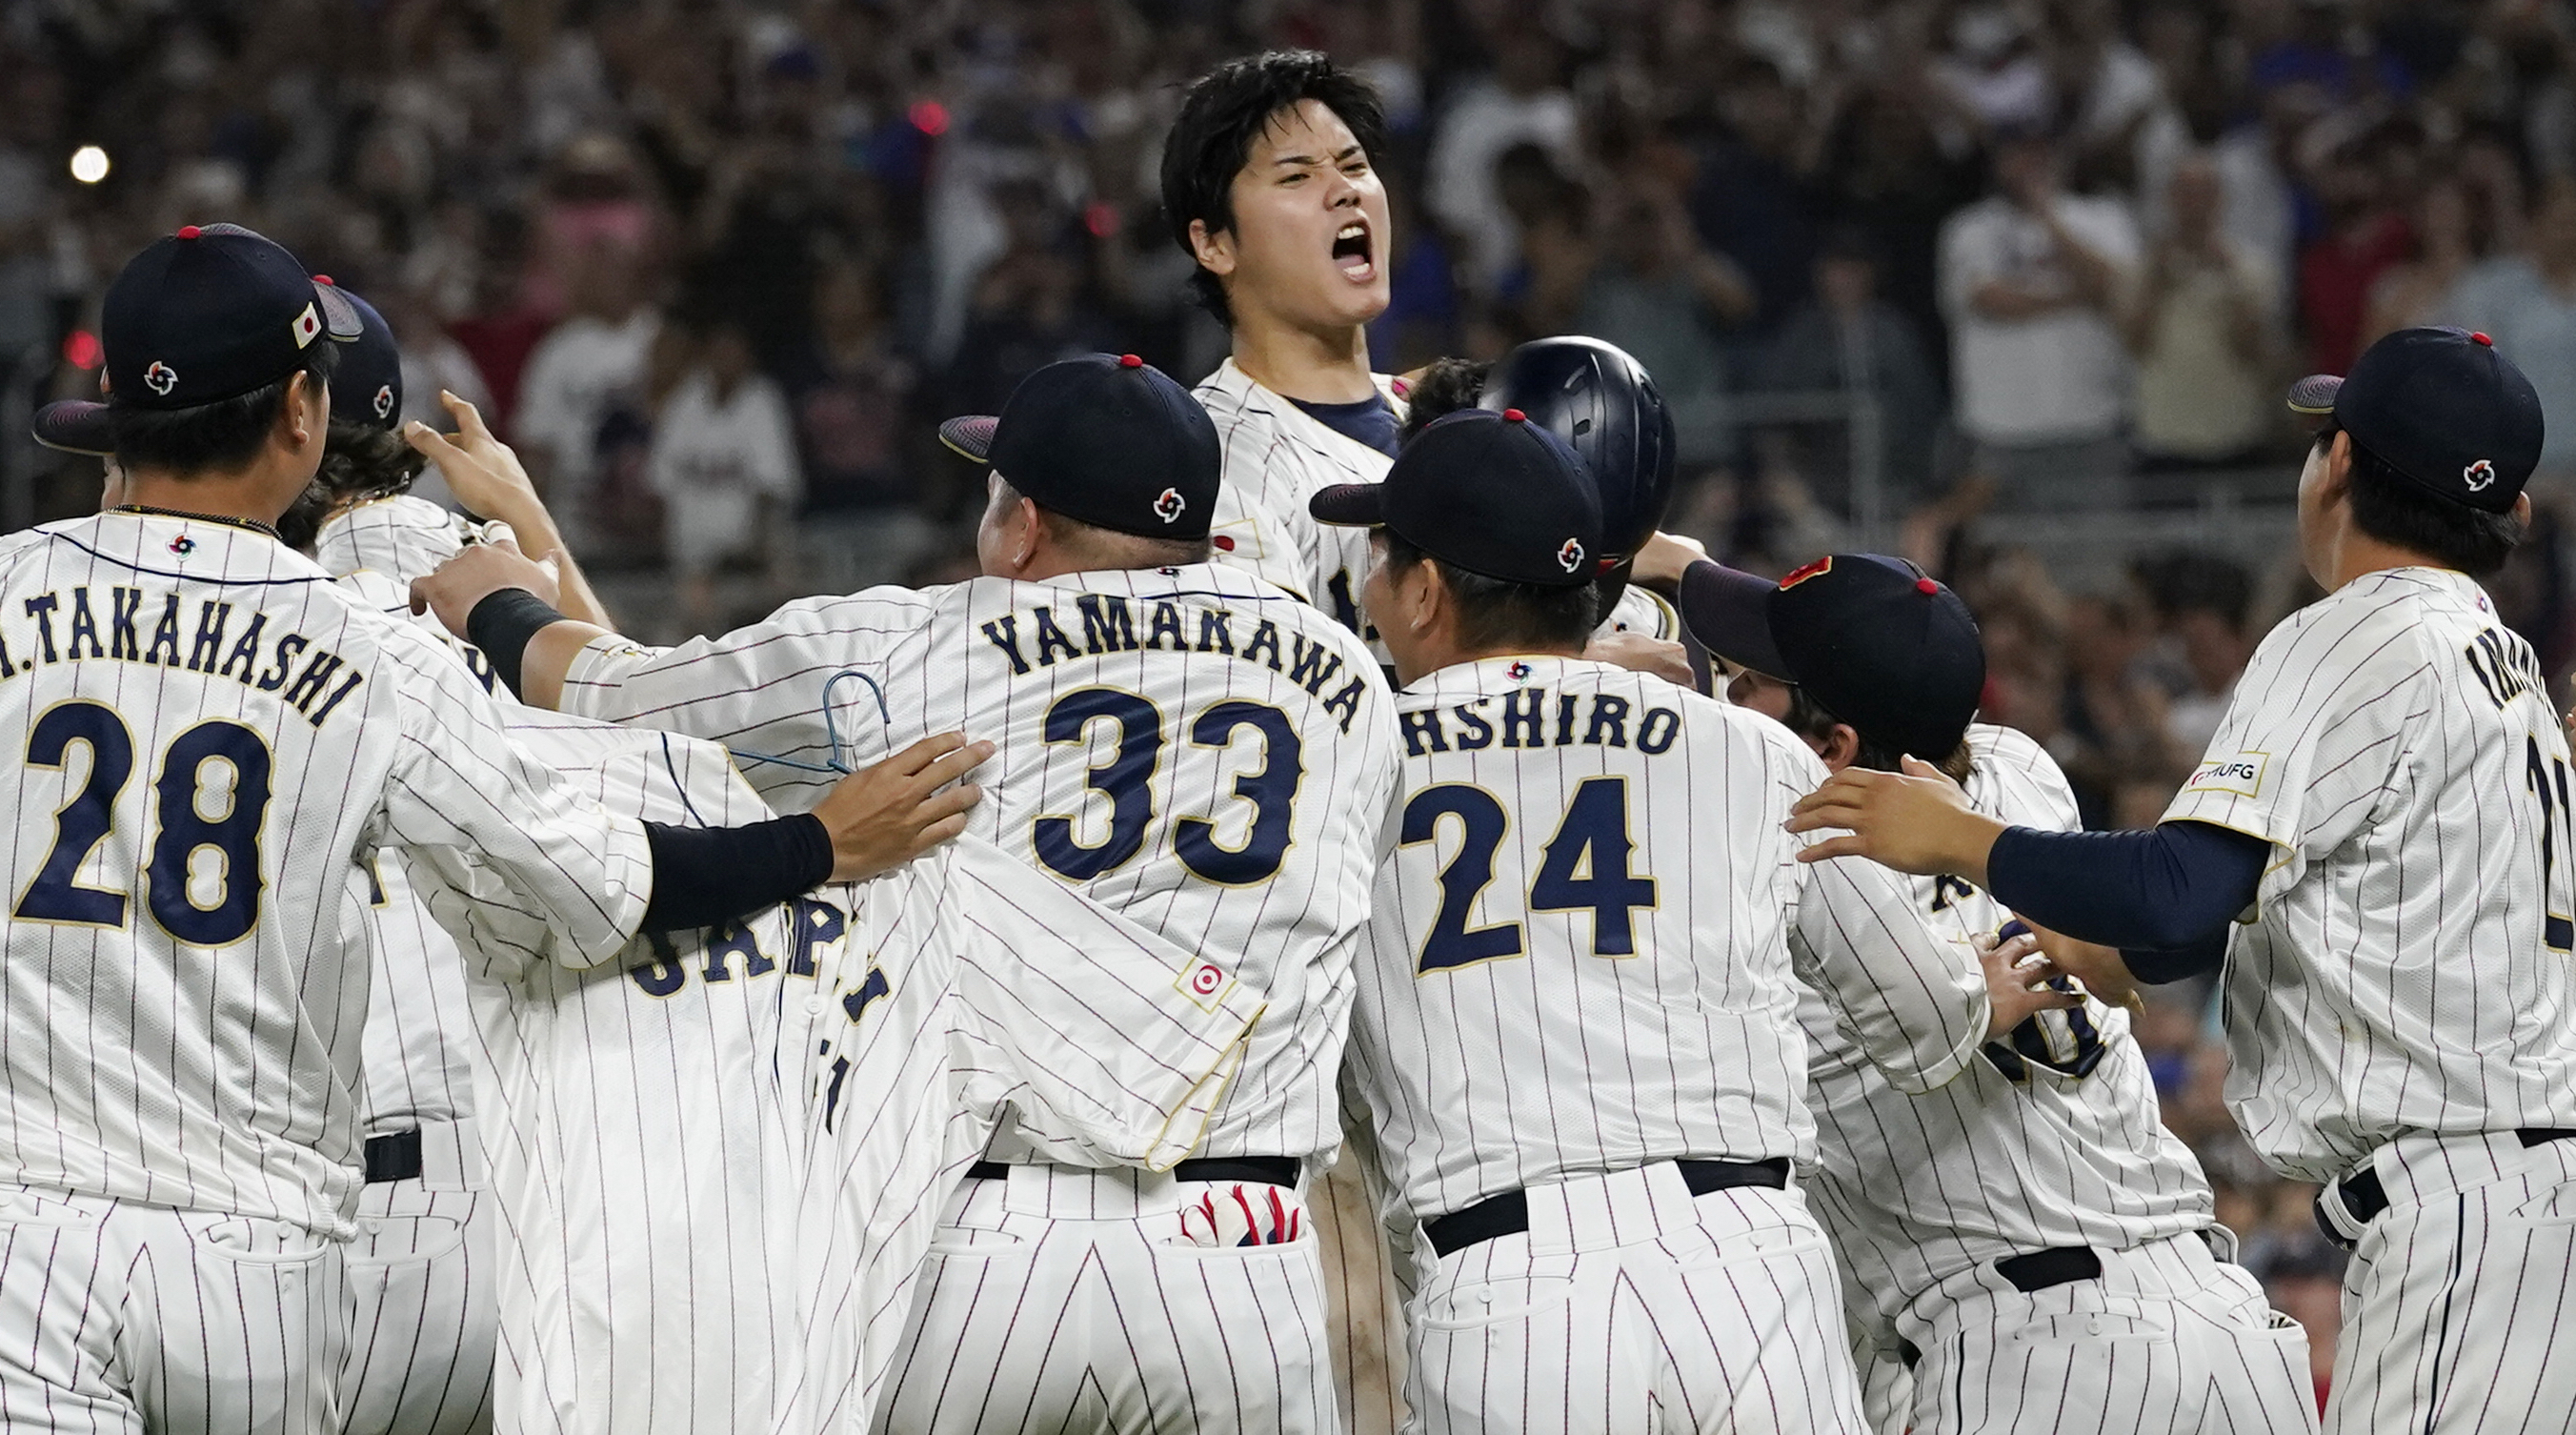 Shohei Ohtani will shine at WBC, but he won't be Japan's only star